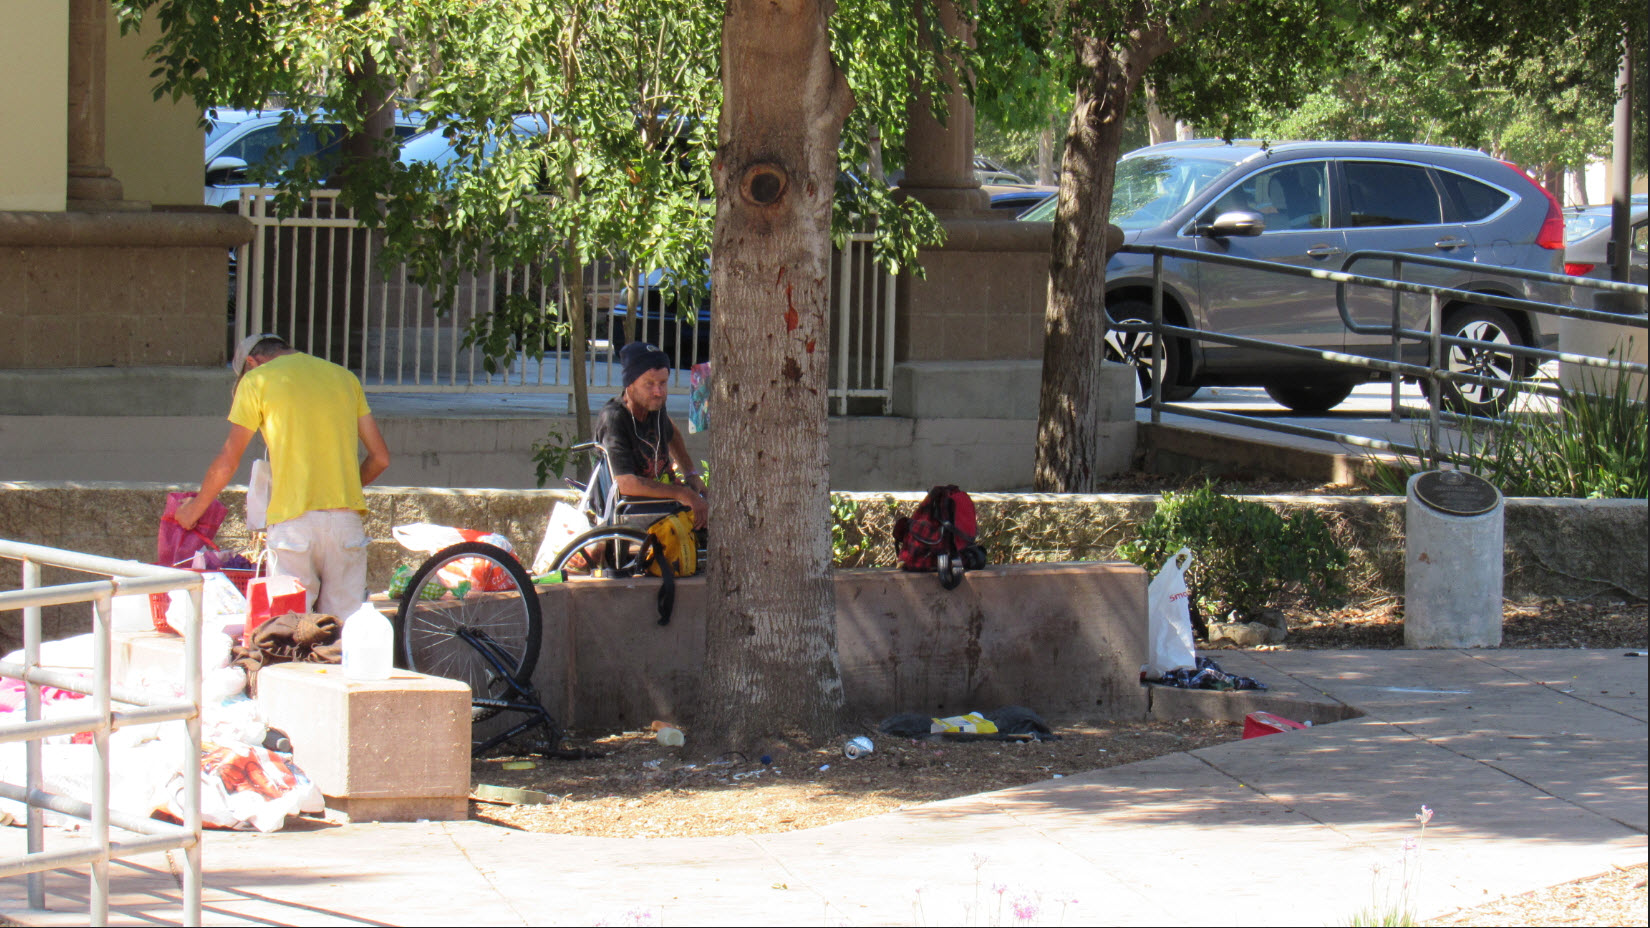 (Click Here to Play Video) Homeless in Thousand Oaks – 11 minutes of their day